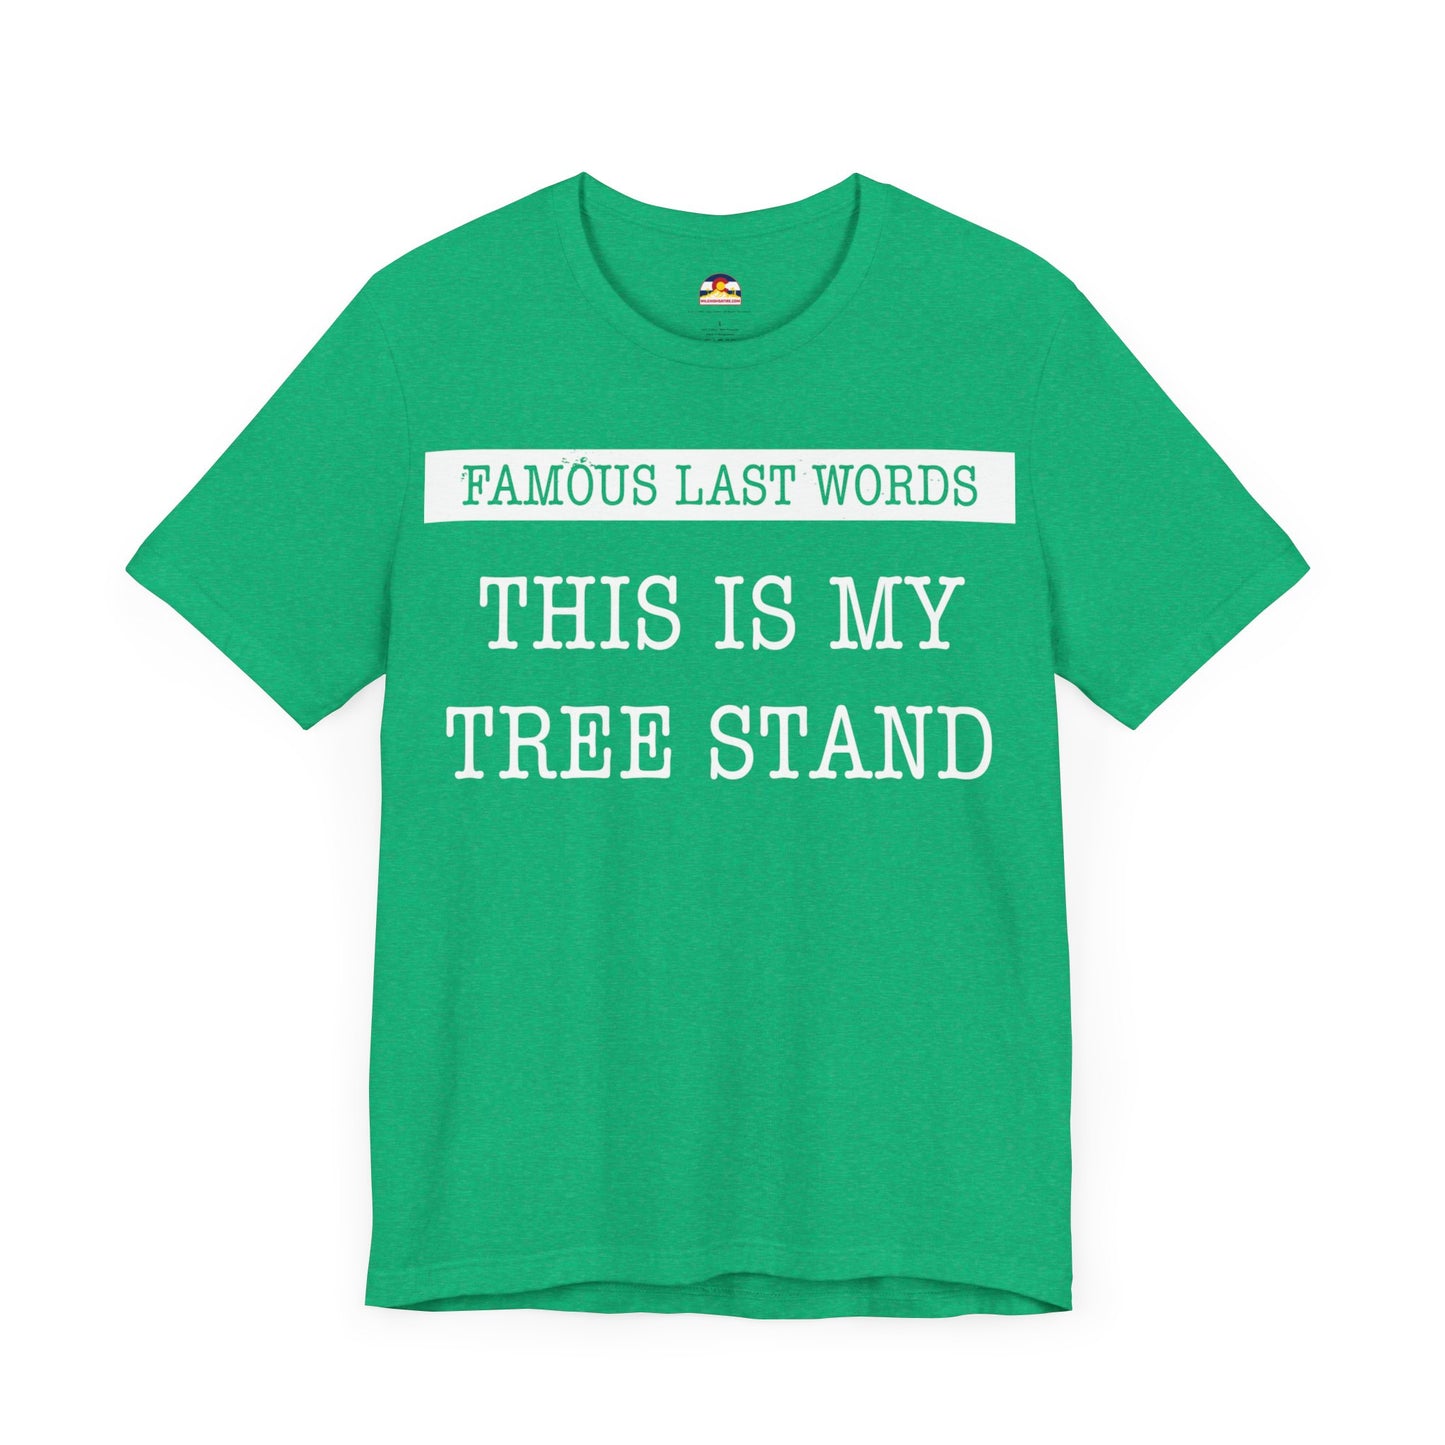 FLW Tree Stand T-Shirt